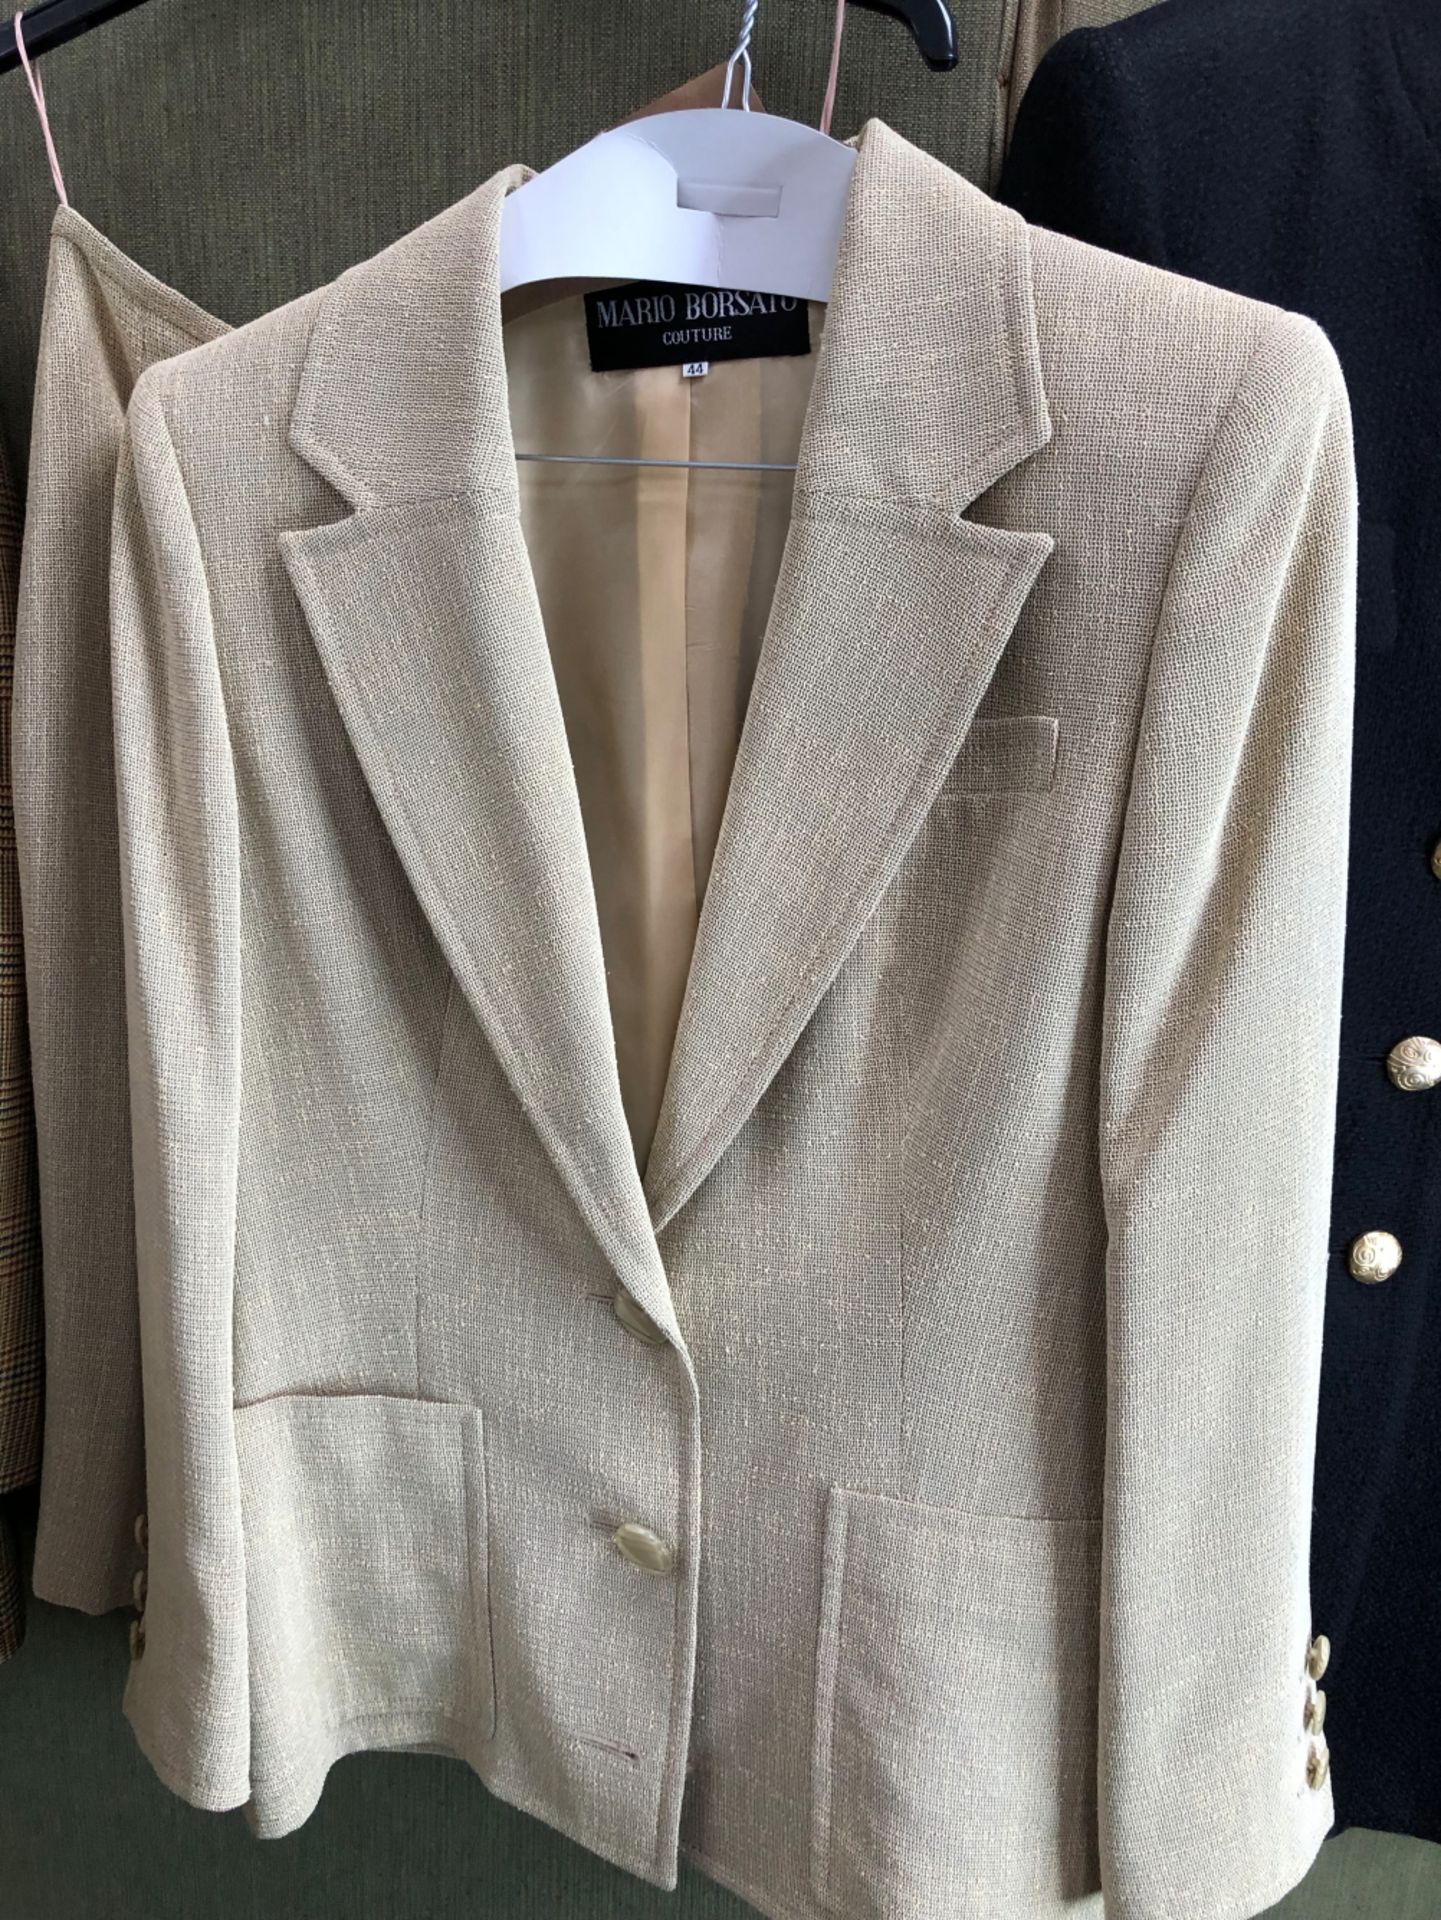 MARIO BORSATO COUTURE SAND LADIES TWO PIECE SUIT JACKET SIZE 44, TOGETHER WITH AN ANTONETTE FRANZ - Image 10 of 19